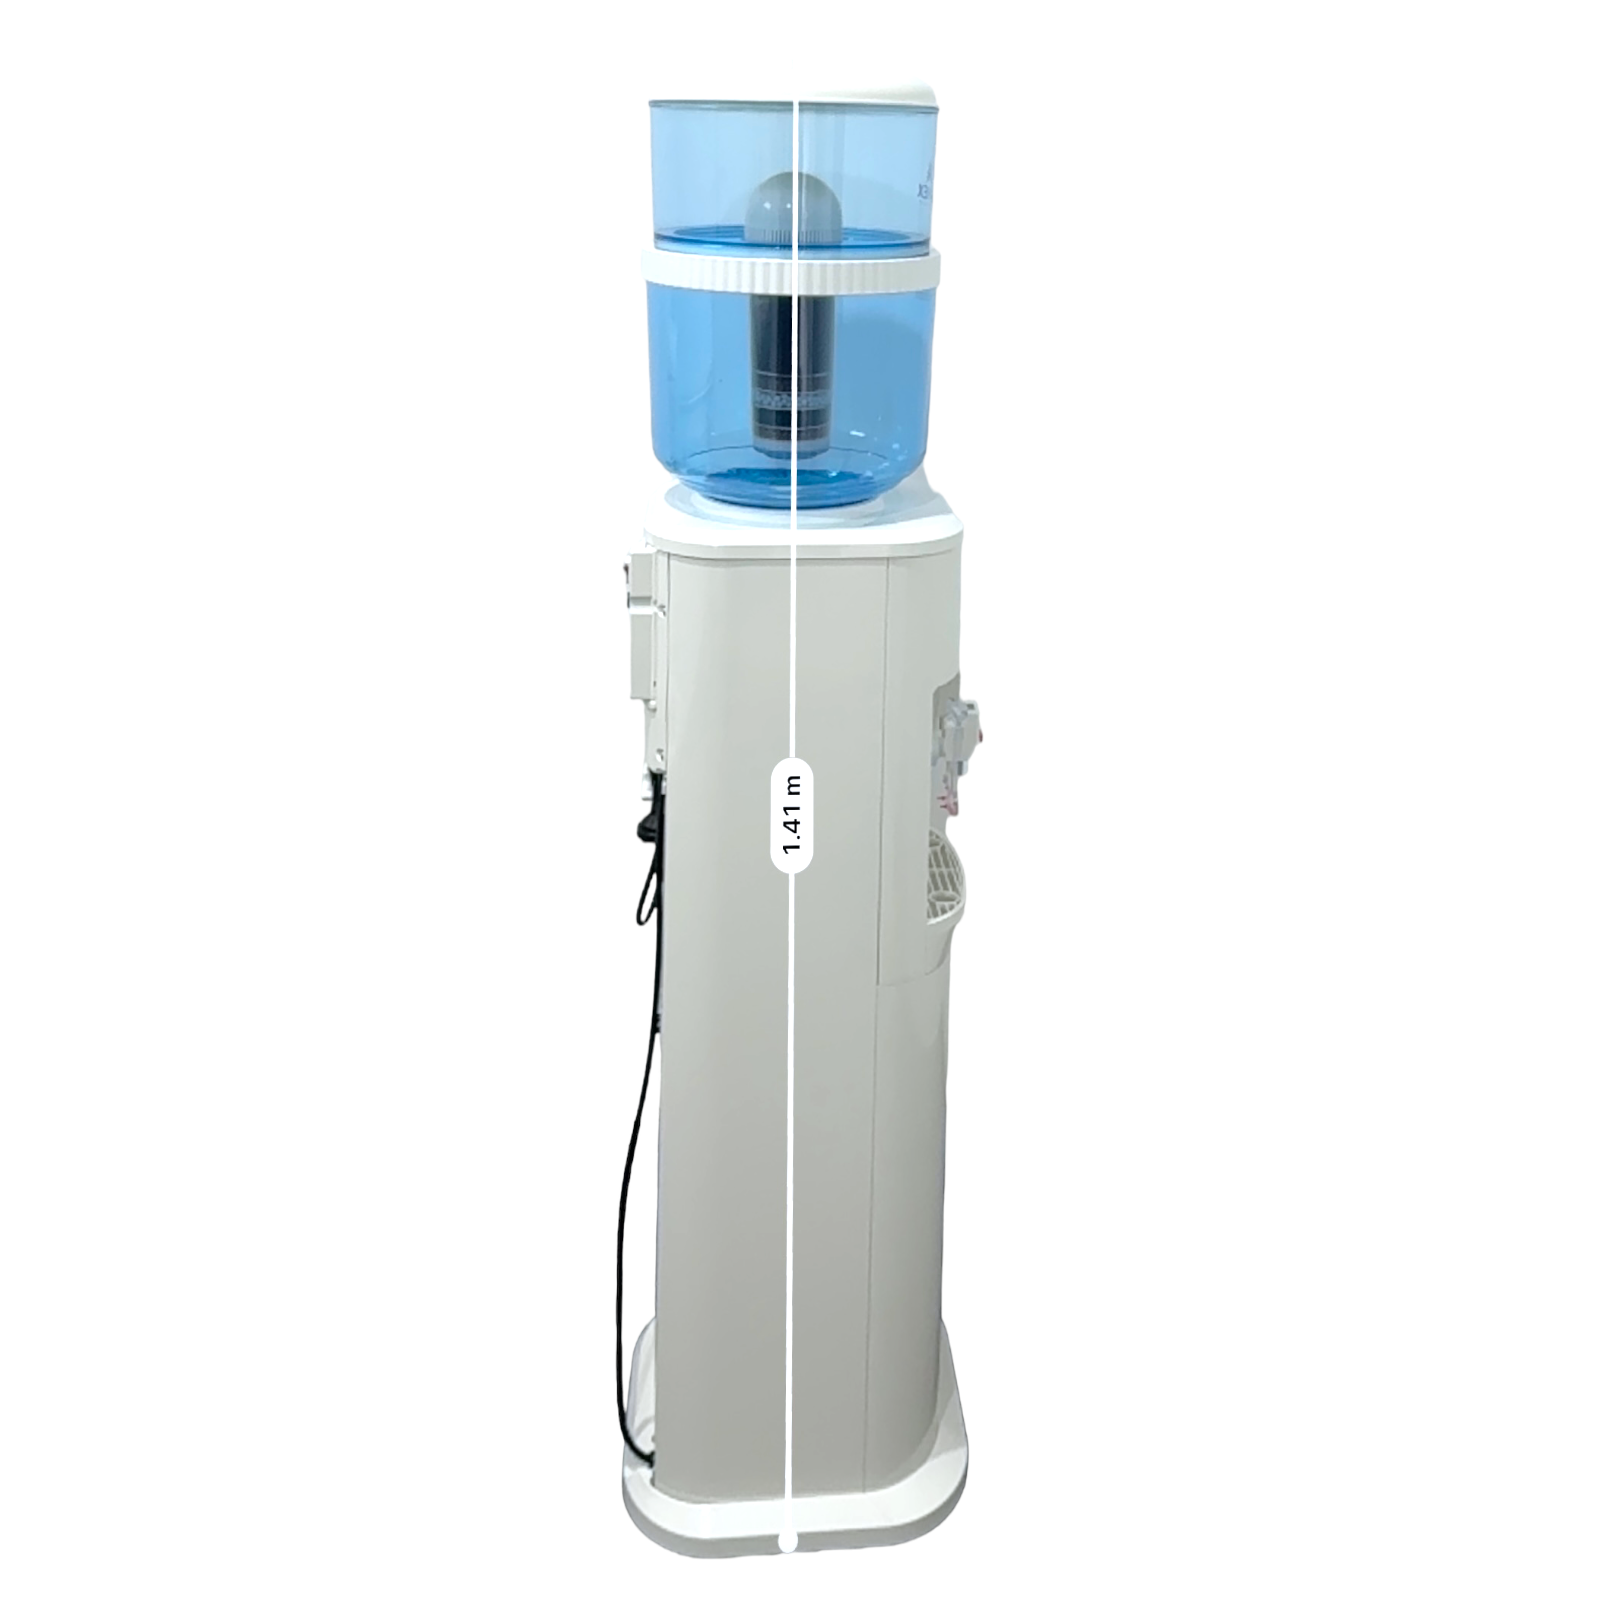 Luxurious Black and White Free Standing Hot and Cold Water Dispenser with Filter Bottle - LG Compressor